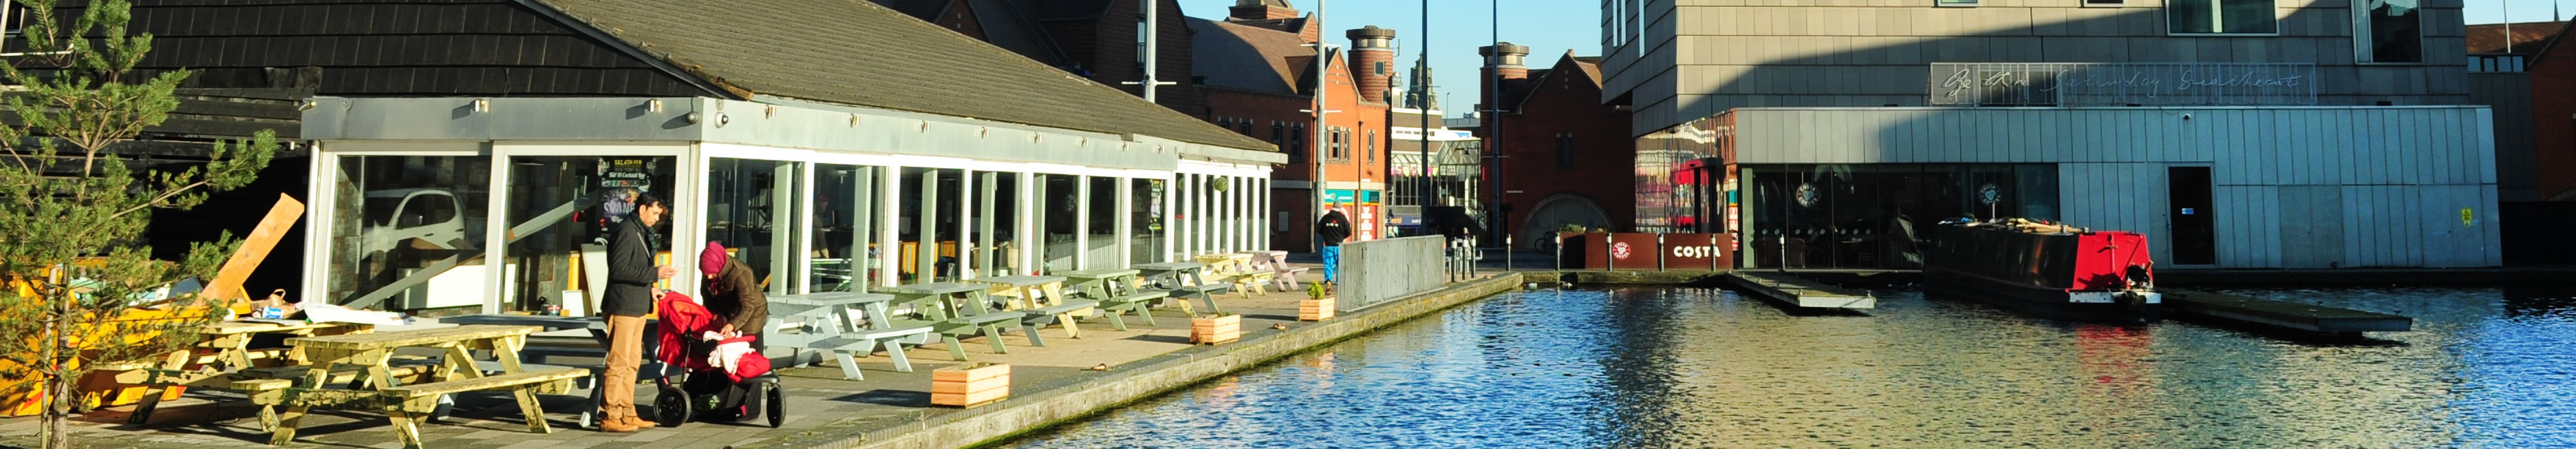 Photo of the Wharf and Art Gallery in Walsall town centre